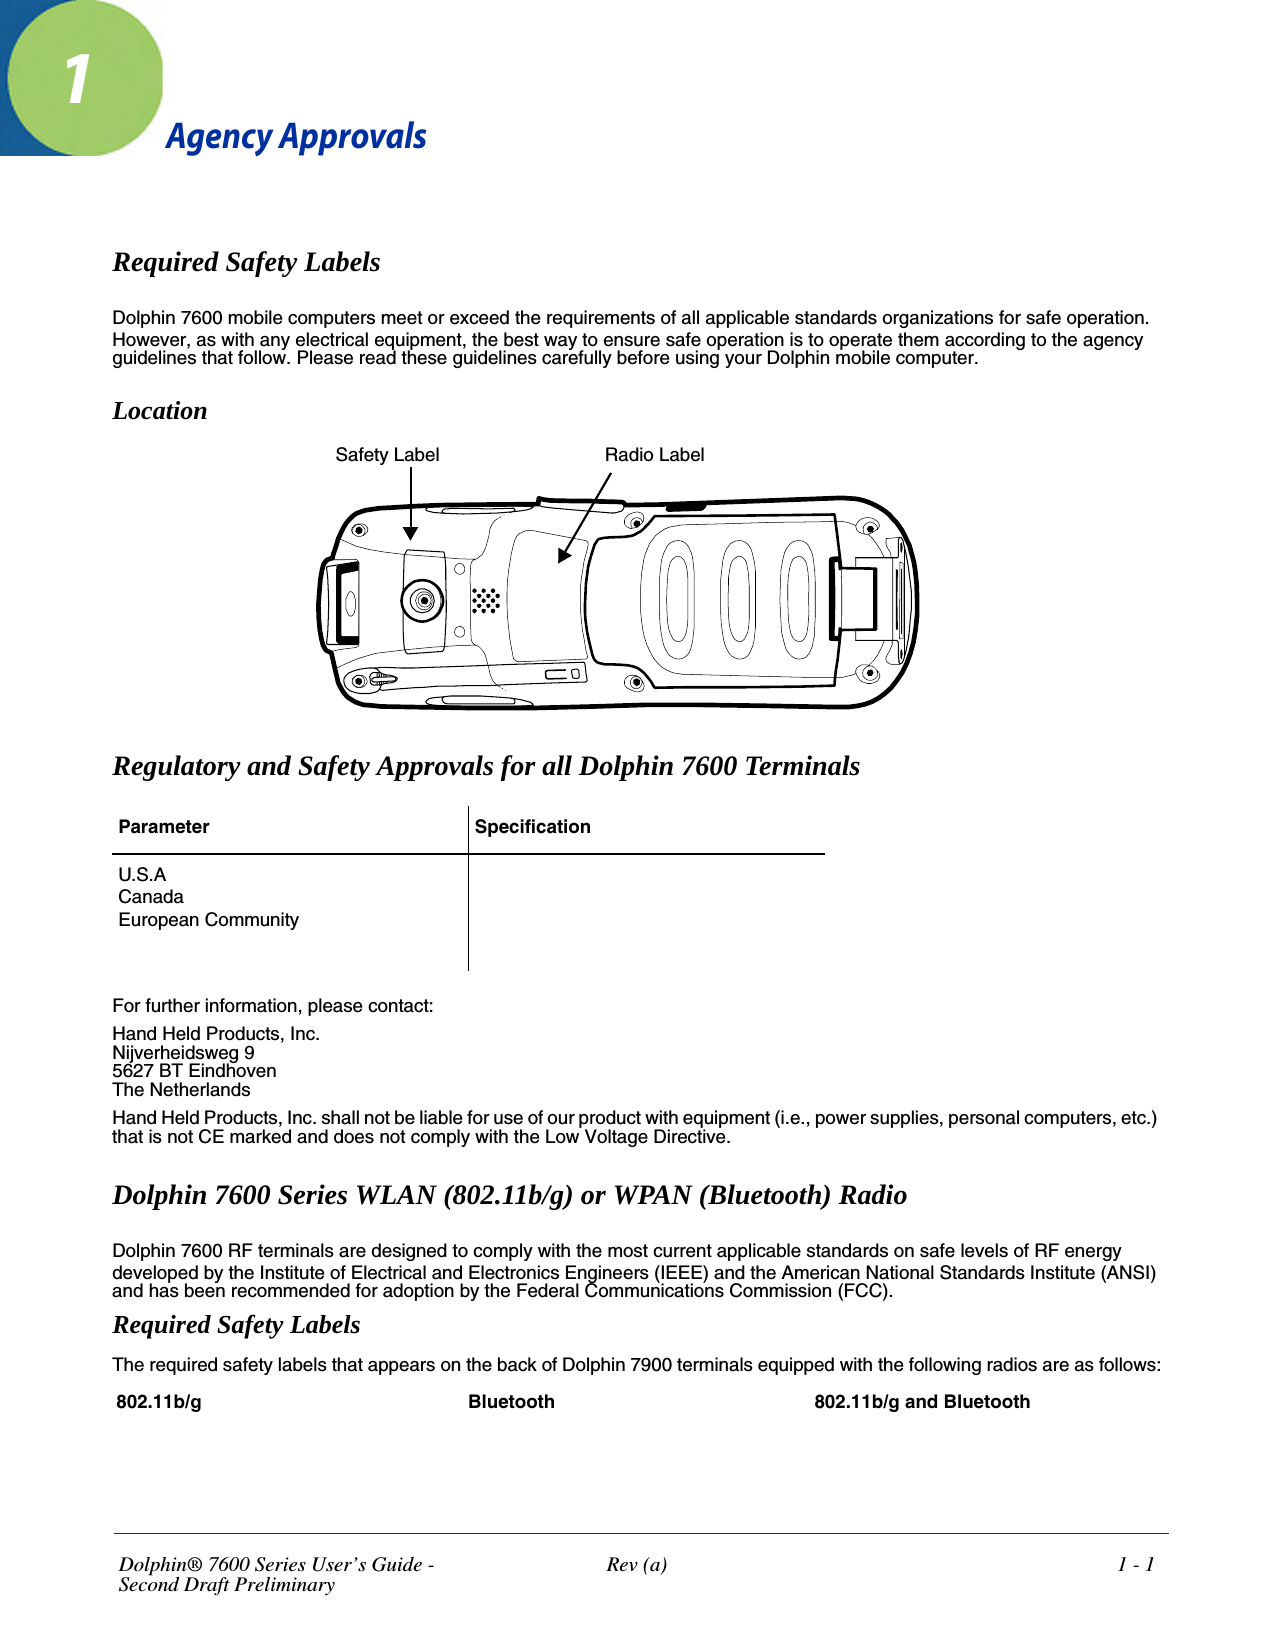 Dolphin® 7600 Series User’s Guide -Second Draft Preliminary Rev (a) 1 - 11Agency ApprovalsRequired Safety LabelsDolphin 7600 mobile computers meet or exceed the requirements of all applicable standards organizations for safe operation. However, as with any electrical equipment, the best way to ensure safe operation is to operate them according to the agency guidelines that follow. Please read these guidelines carefully before using your Dolphin mobile computer.Location Regulatory and Safety Approvals for all Dolphin 7600 Terminals For further information, please contact:Hand Held Products, Inc.Nijverheidsweg 95627 BT EindhovenThe NetherlandsHand Held Products, Inc. shall not be liable for use of our product with equipment (i.e., power supplies, personal computers, etc.) that is not CE marked and does not comply with the Low Voltage Directive.Dolphin 7600 Series WLAN (802.11b/g) or WPAN (Bluetooth) RadioDolphin 7600 RF terminals are designed to comply with the most current applicable standards on safe levels of RF energy developed by the Institute of Electrical and Electronics Engineers (IEEE) and the American National Standards Institute (ANSI) and has been recommended for adoption by the Federal Communications Commission (FCC). Required Safety LabelsThe required safety labels that appears on the back of Dolphin 7900 terminals equipped with the following radios are as follows:Parameter SpecificationU.S.ACanadaEuropean Community802.11b/g Bluetooth 802.11b/g and BluetoothSafety Label Radio Label